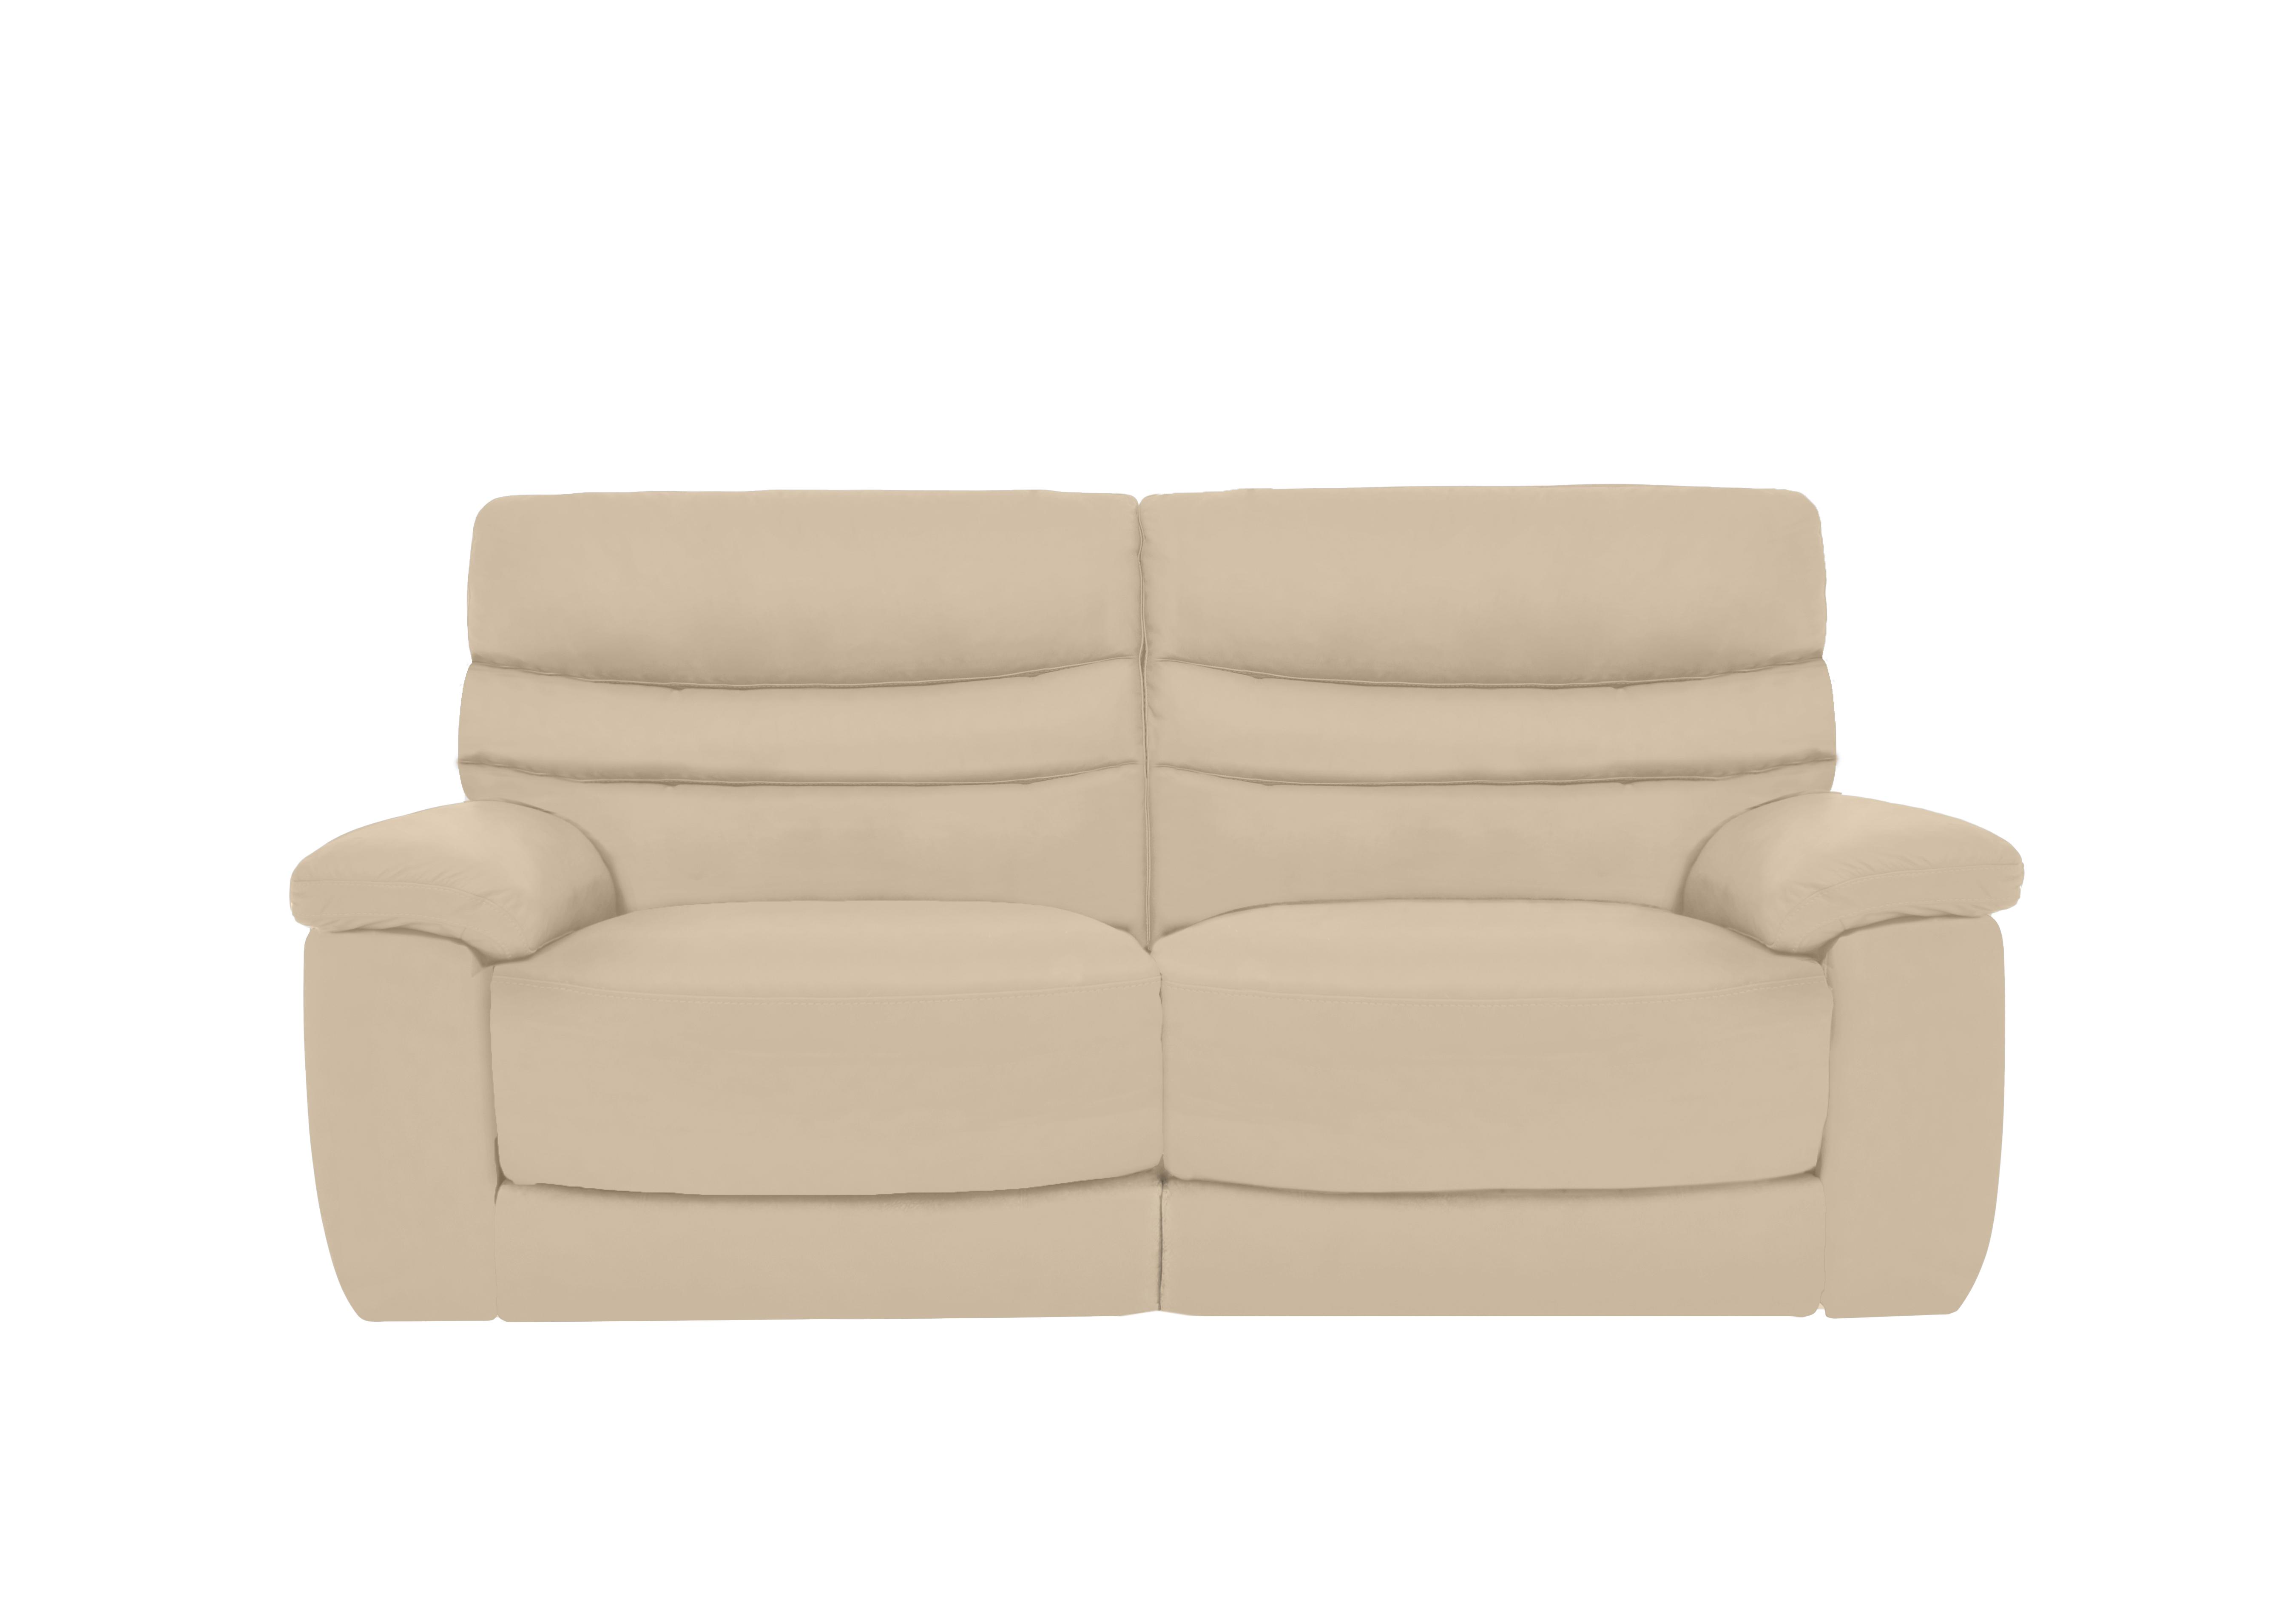 Nimbus 3 Seater Leather Power Recliner Sofa with Power Headrests in Bx-862c Bisque on Furniture Village